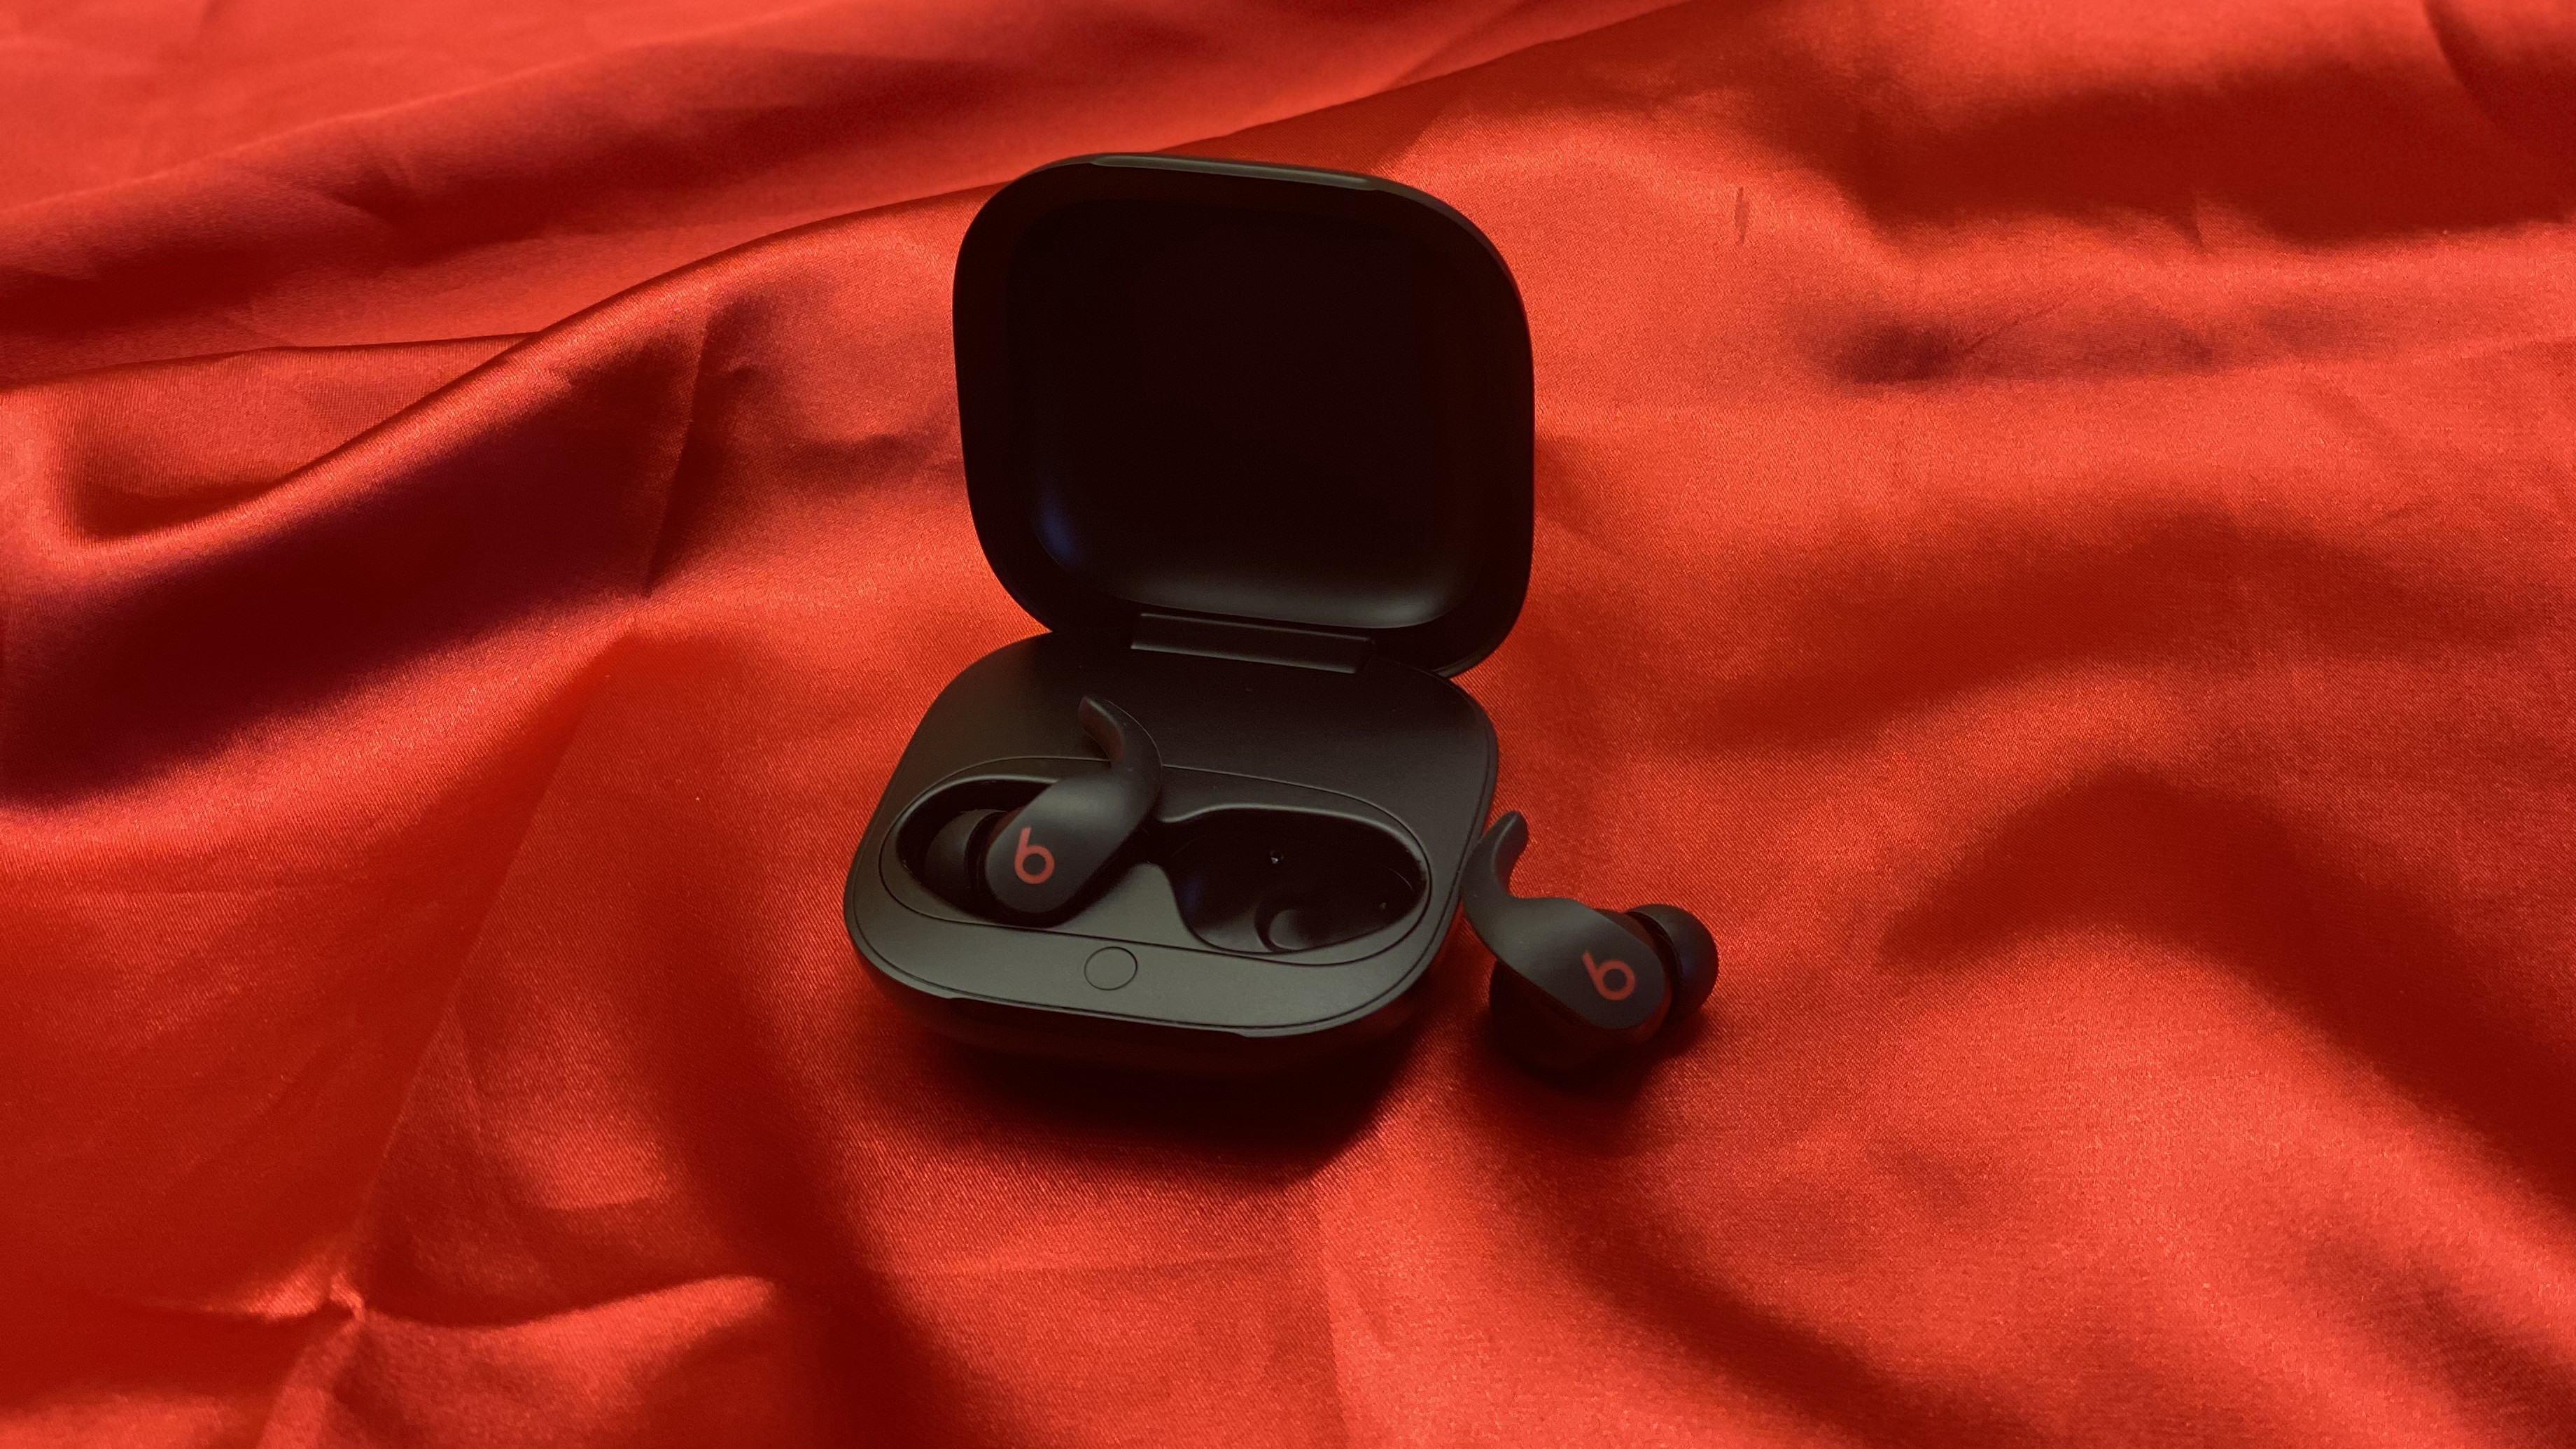 The Beats Fit Pro earbuds in their charging case on a red backdrop